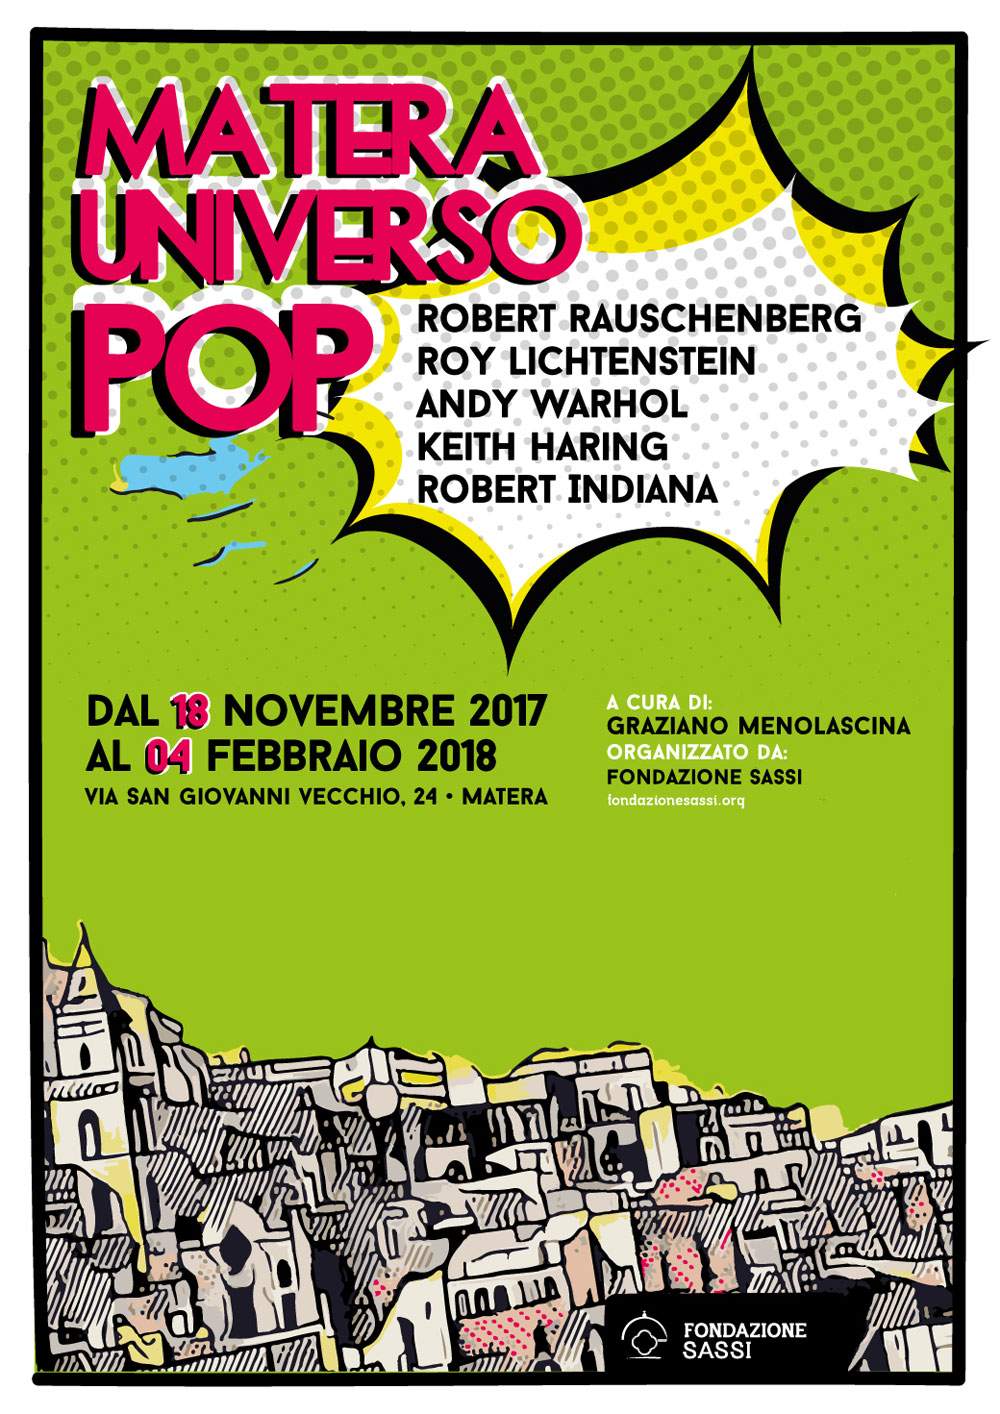 Matera Universe Pop: the works of Pop Art on display at the Sassi Foundation